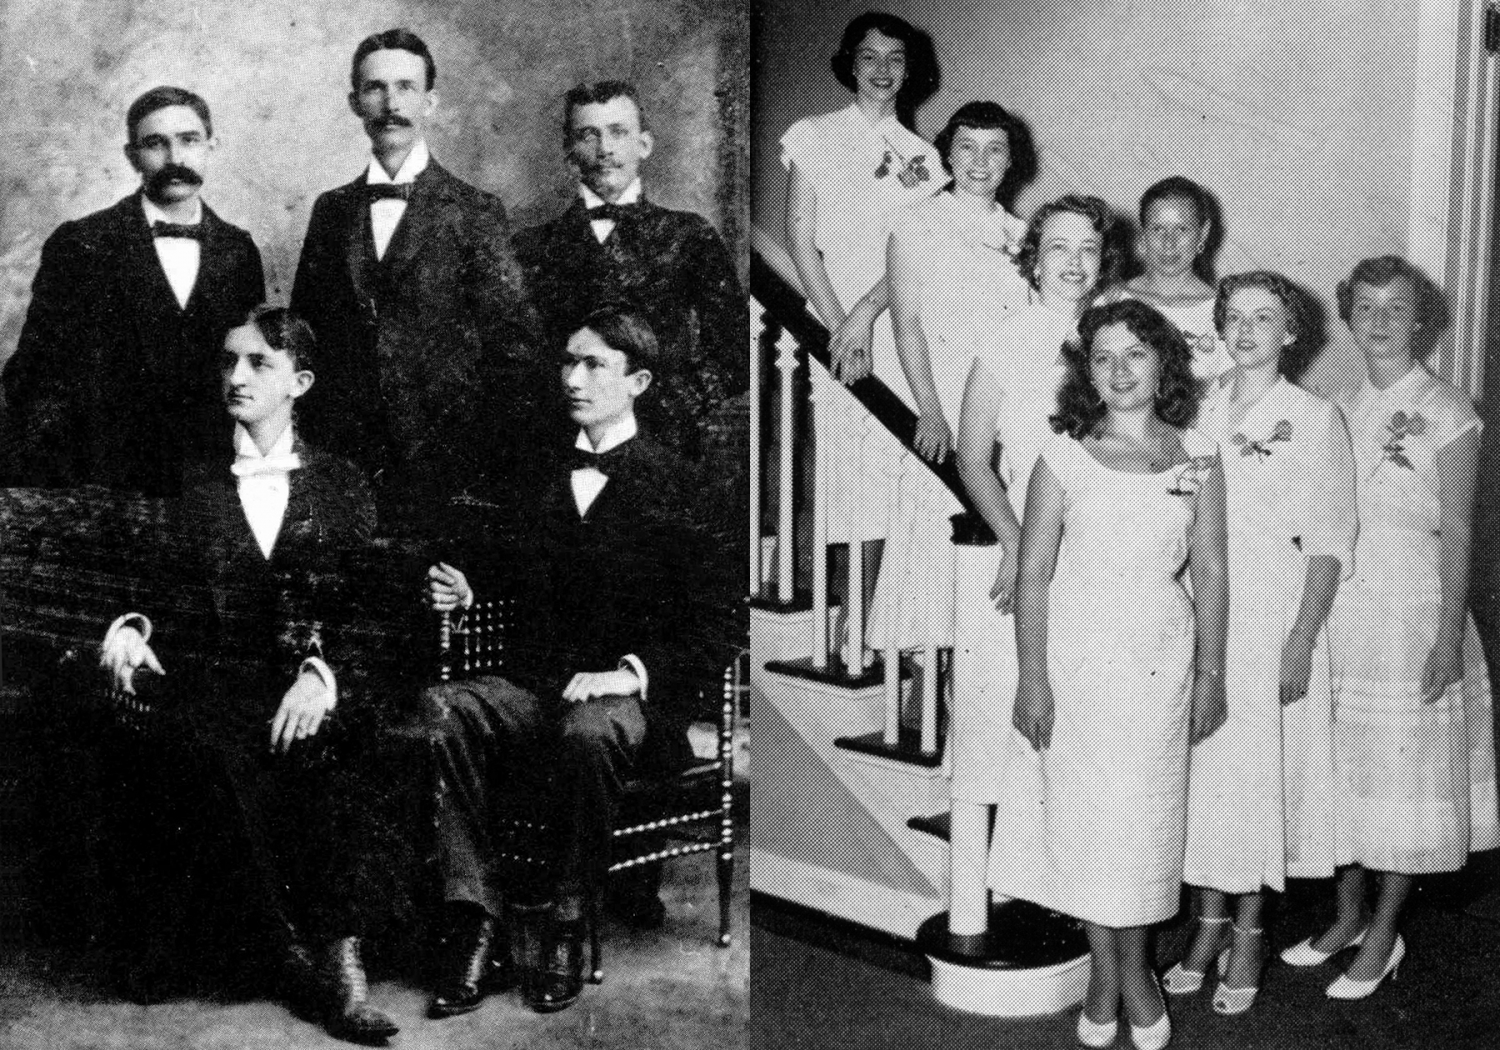 The first Greek chapter on campus were Alpha Tau Omega (1888) for men and Alpha Xi Delta (1954) for women.